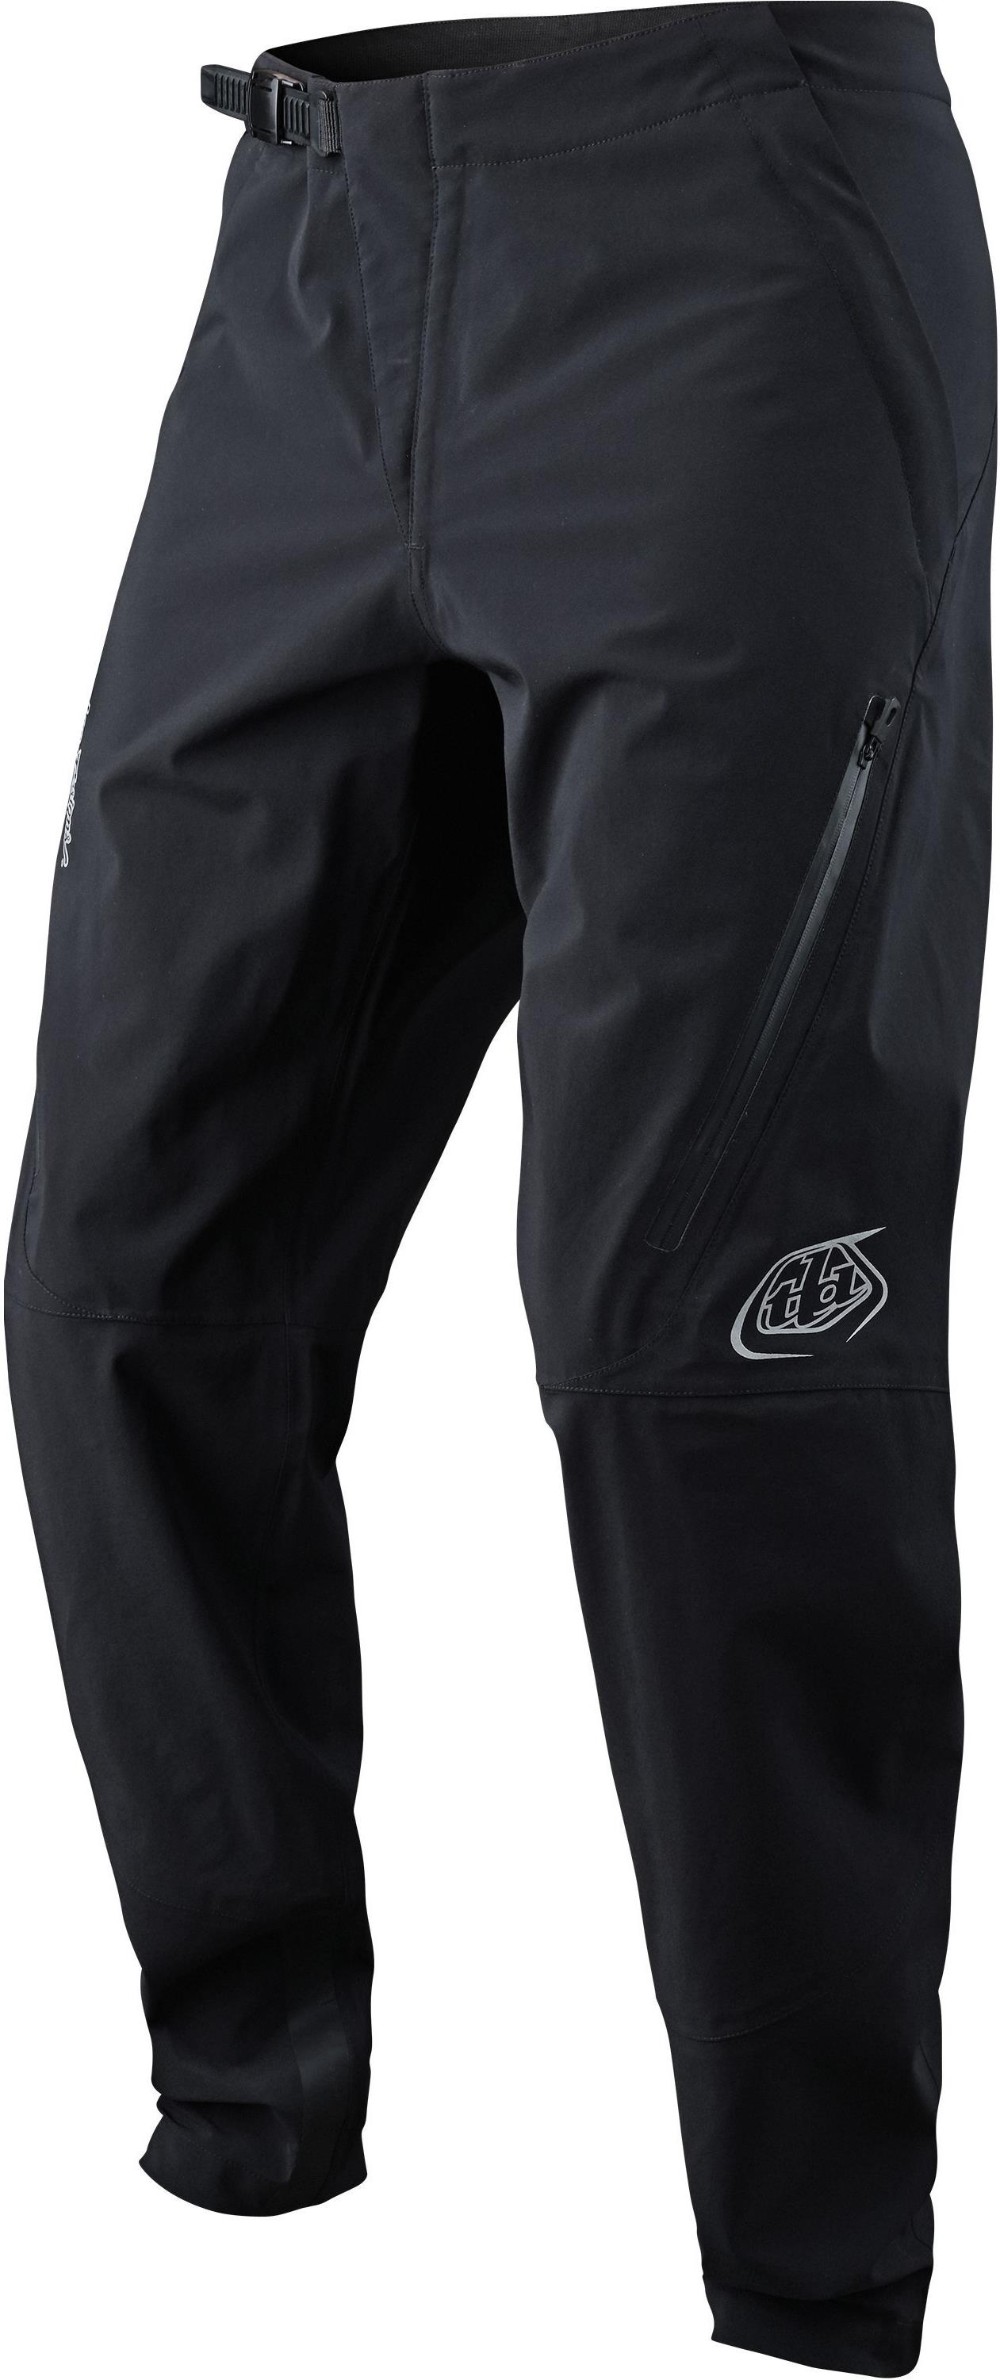 Resist MTB Cycling Trousers image 0